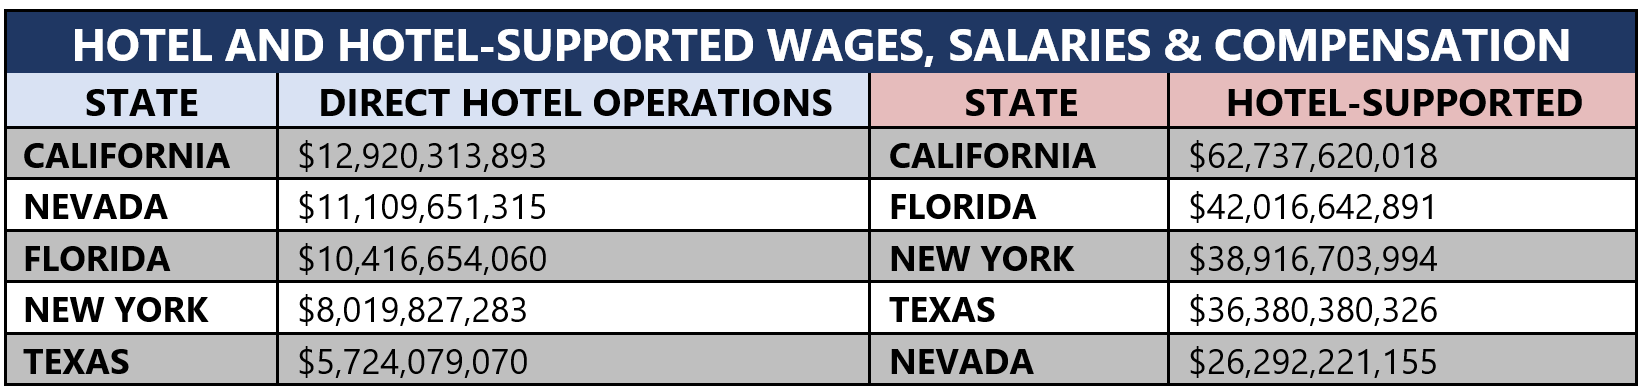 SUPPORTED WAGES, SALARIES & COMPENSATION